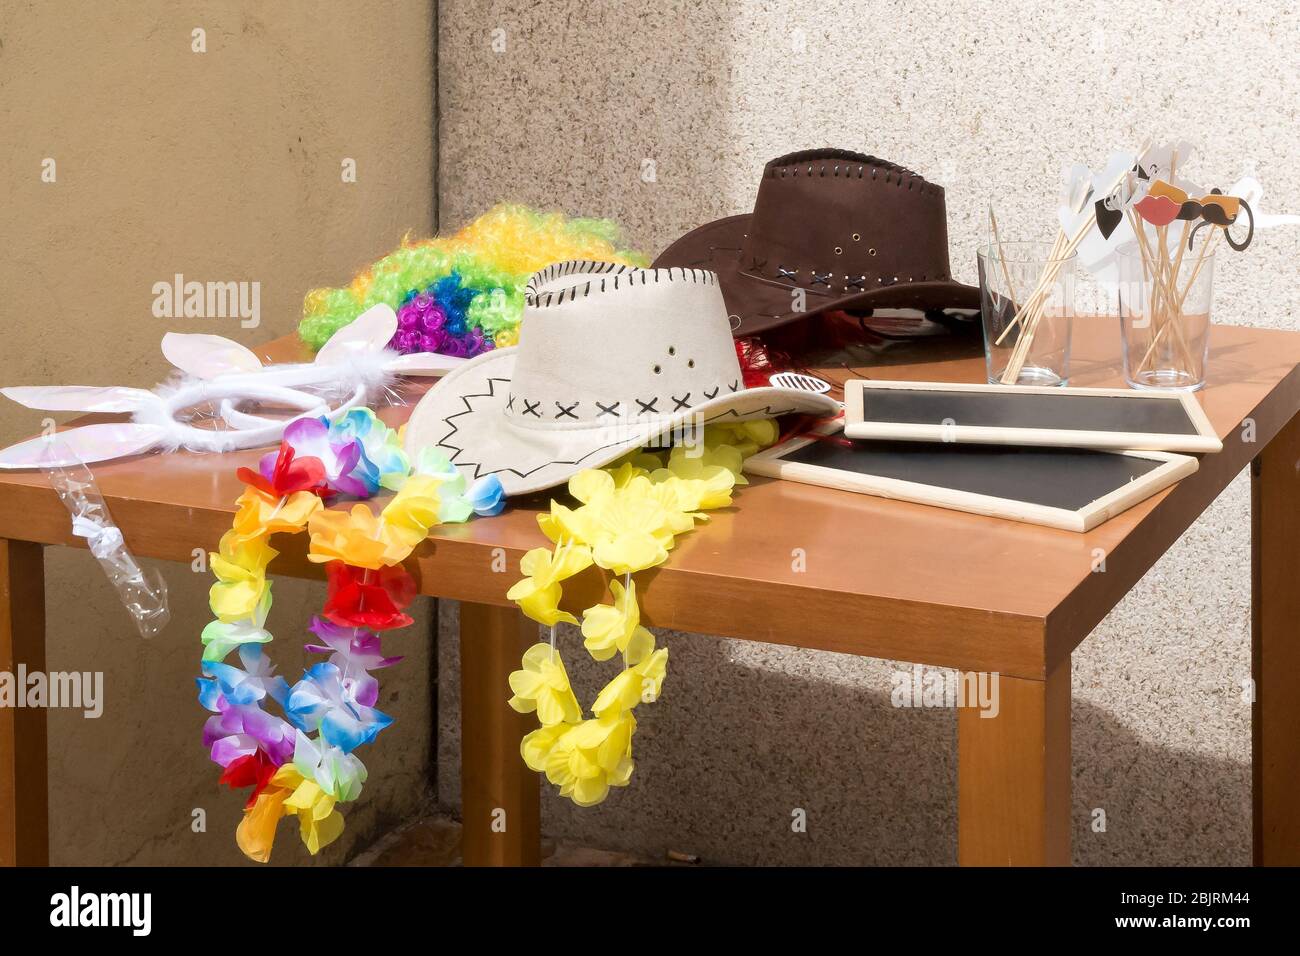 White cowboy hat next to other party accessories for a photo call on a table. Stock Photo